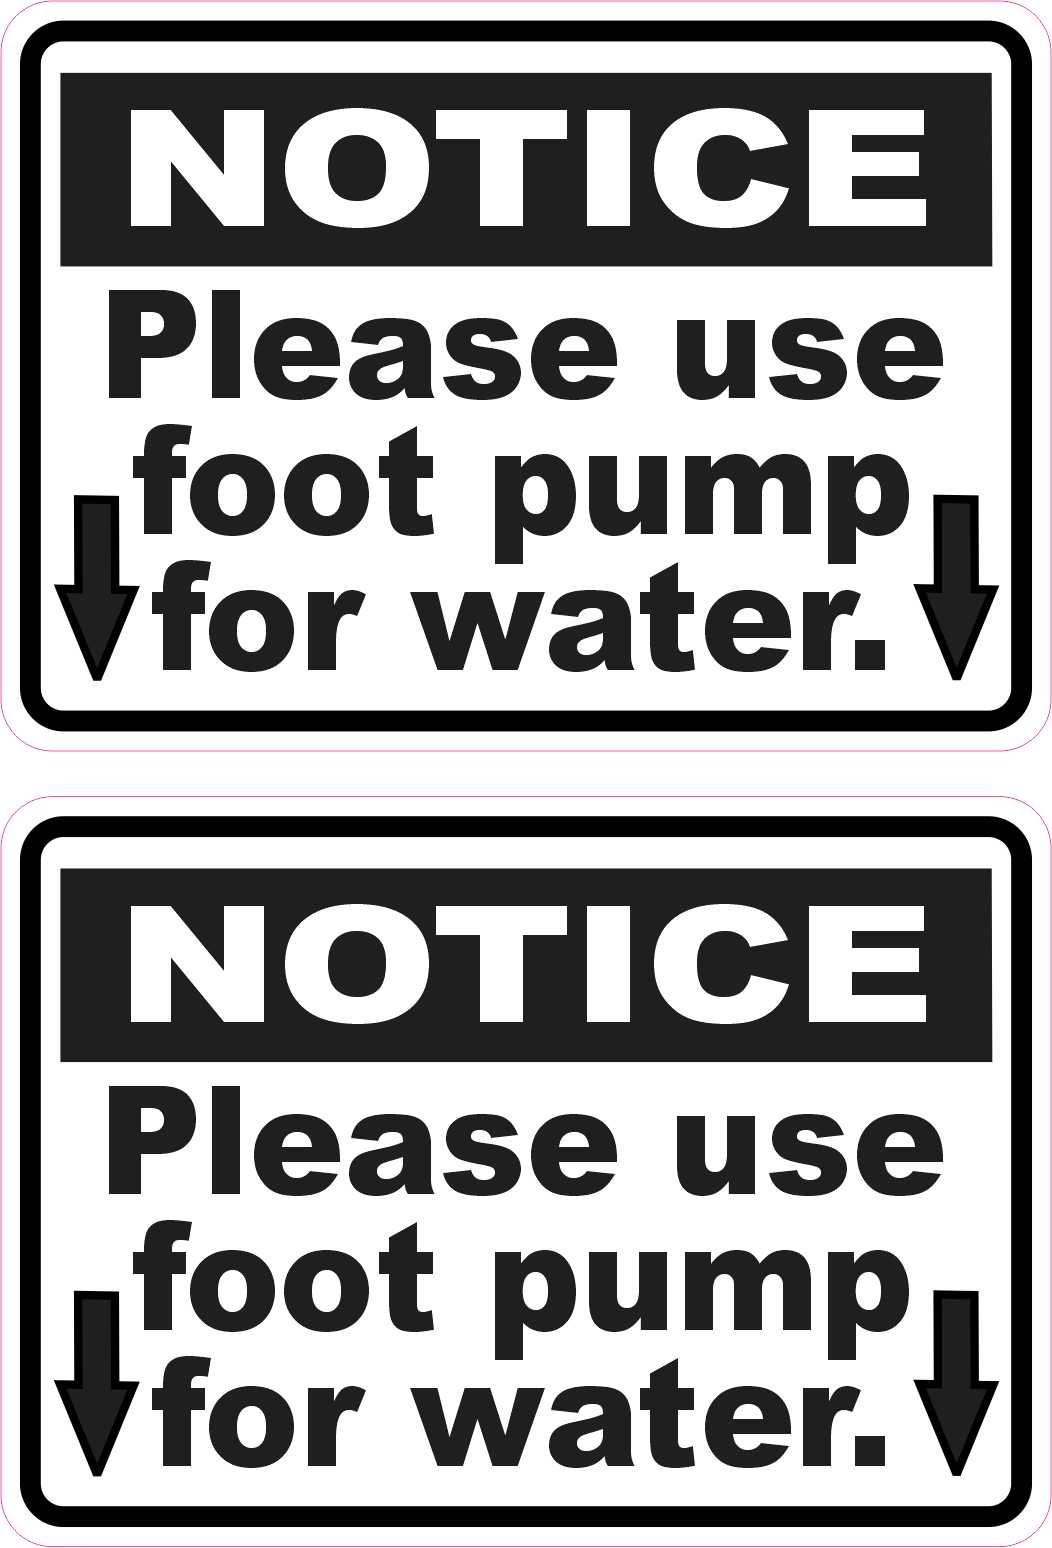 Stickertalk Use Foot Pump For Water Vinyl Stickers 1 Sheet Of 2 Stickers 3 5 Inches X 2 5 Inches Each Stickertalk